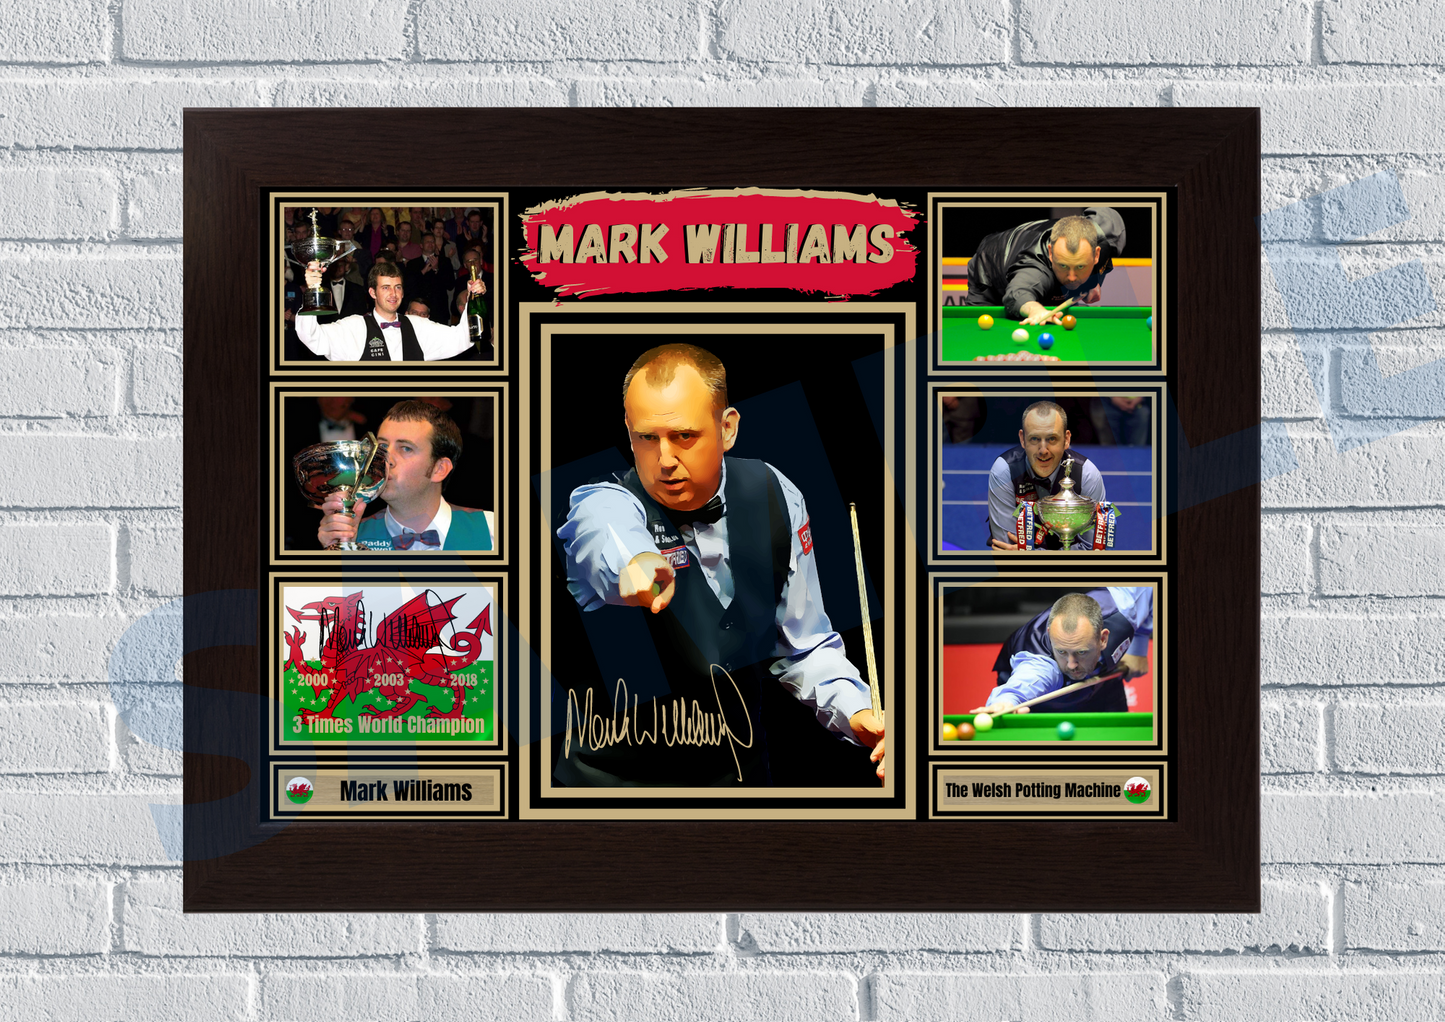 Mark Williams - The Welsh Potting Machine (Snooker) #74 - collectible/memorabilia/print/ signed